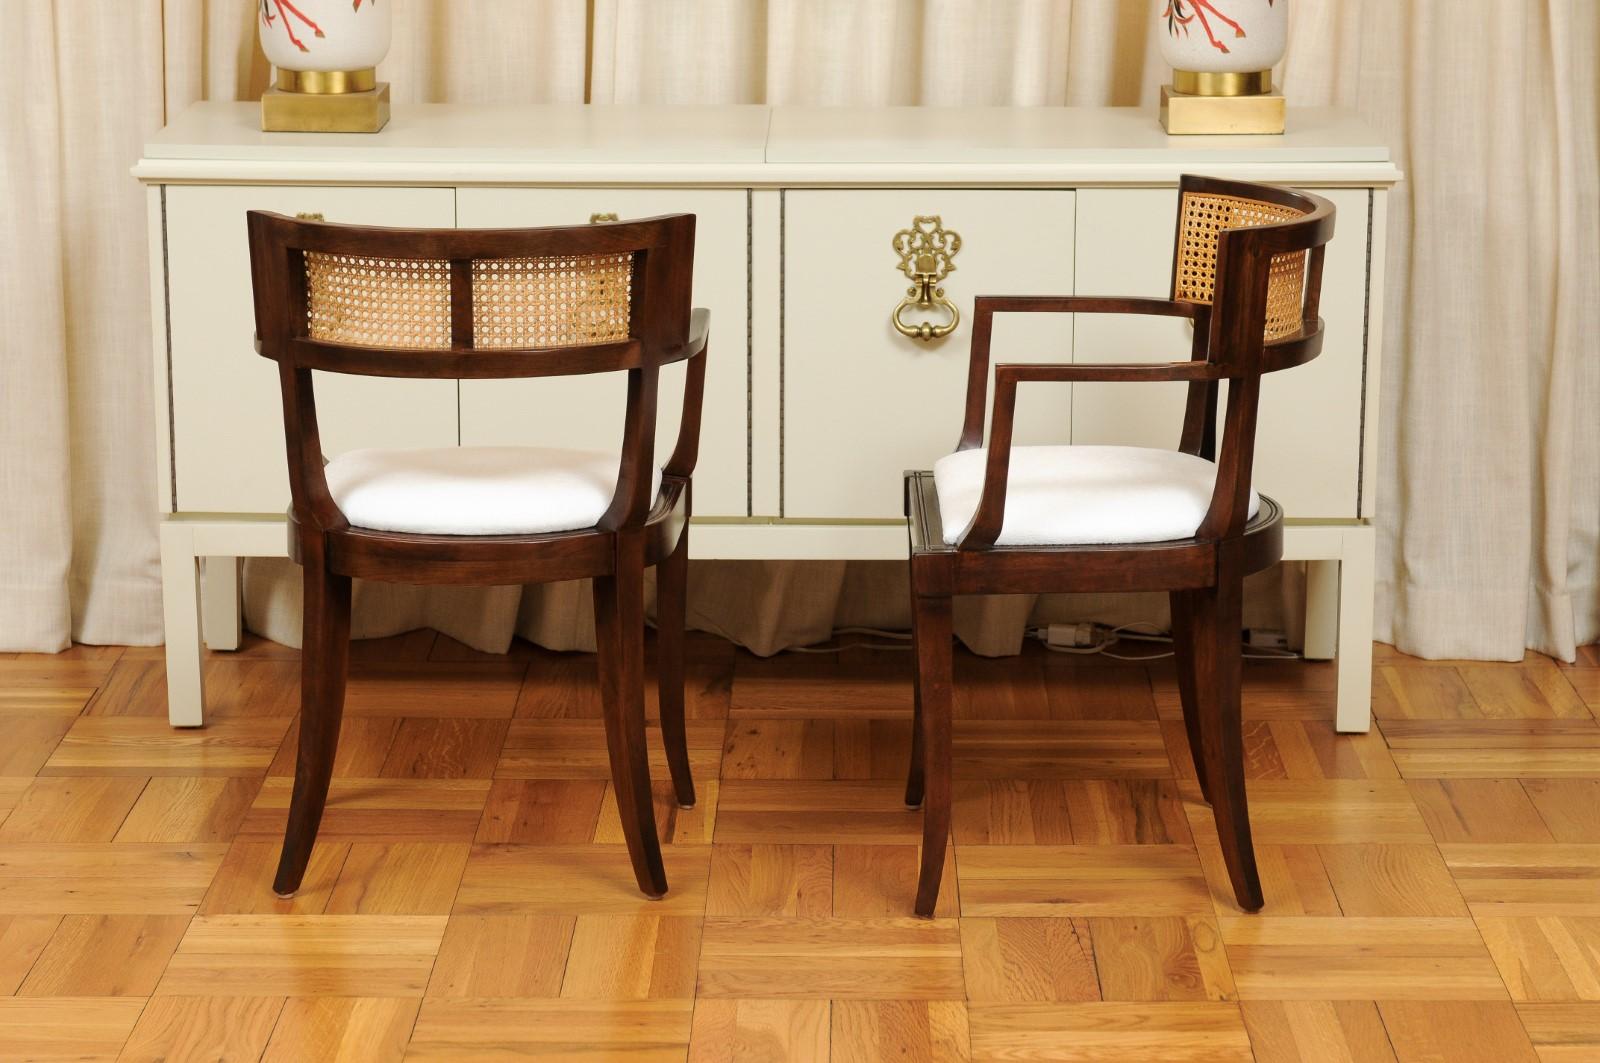 All Arms, Exquisite Set of 20 Klismos Cane Dining Chairs by Baker, circa 1958 For Sale 4